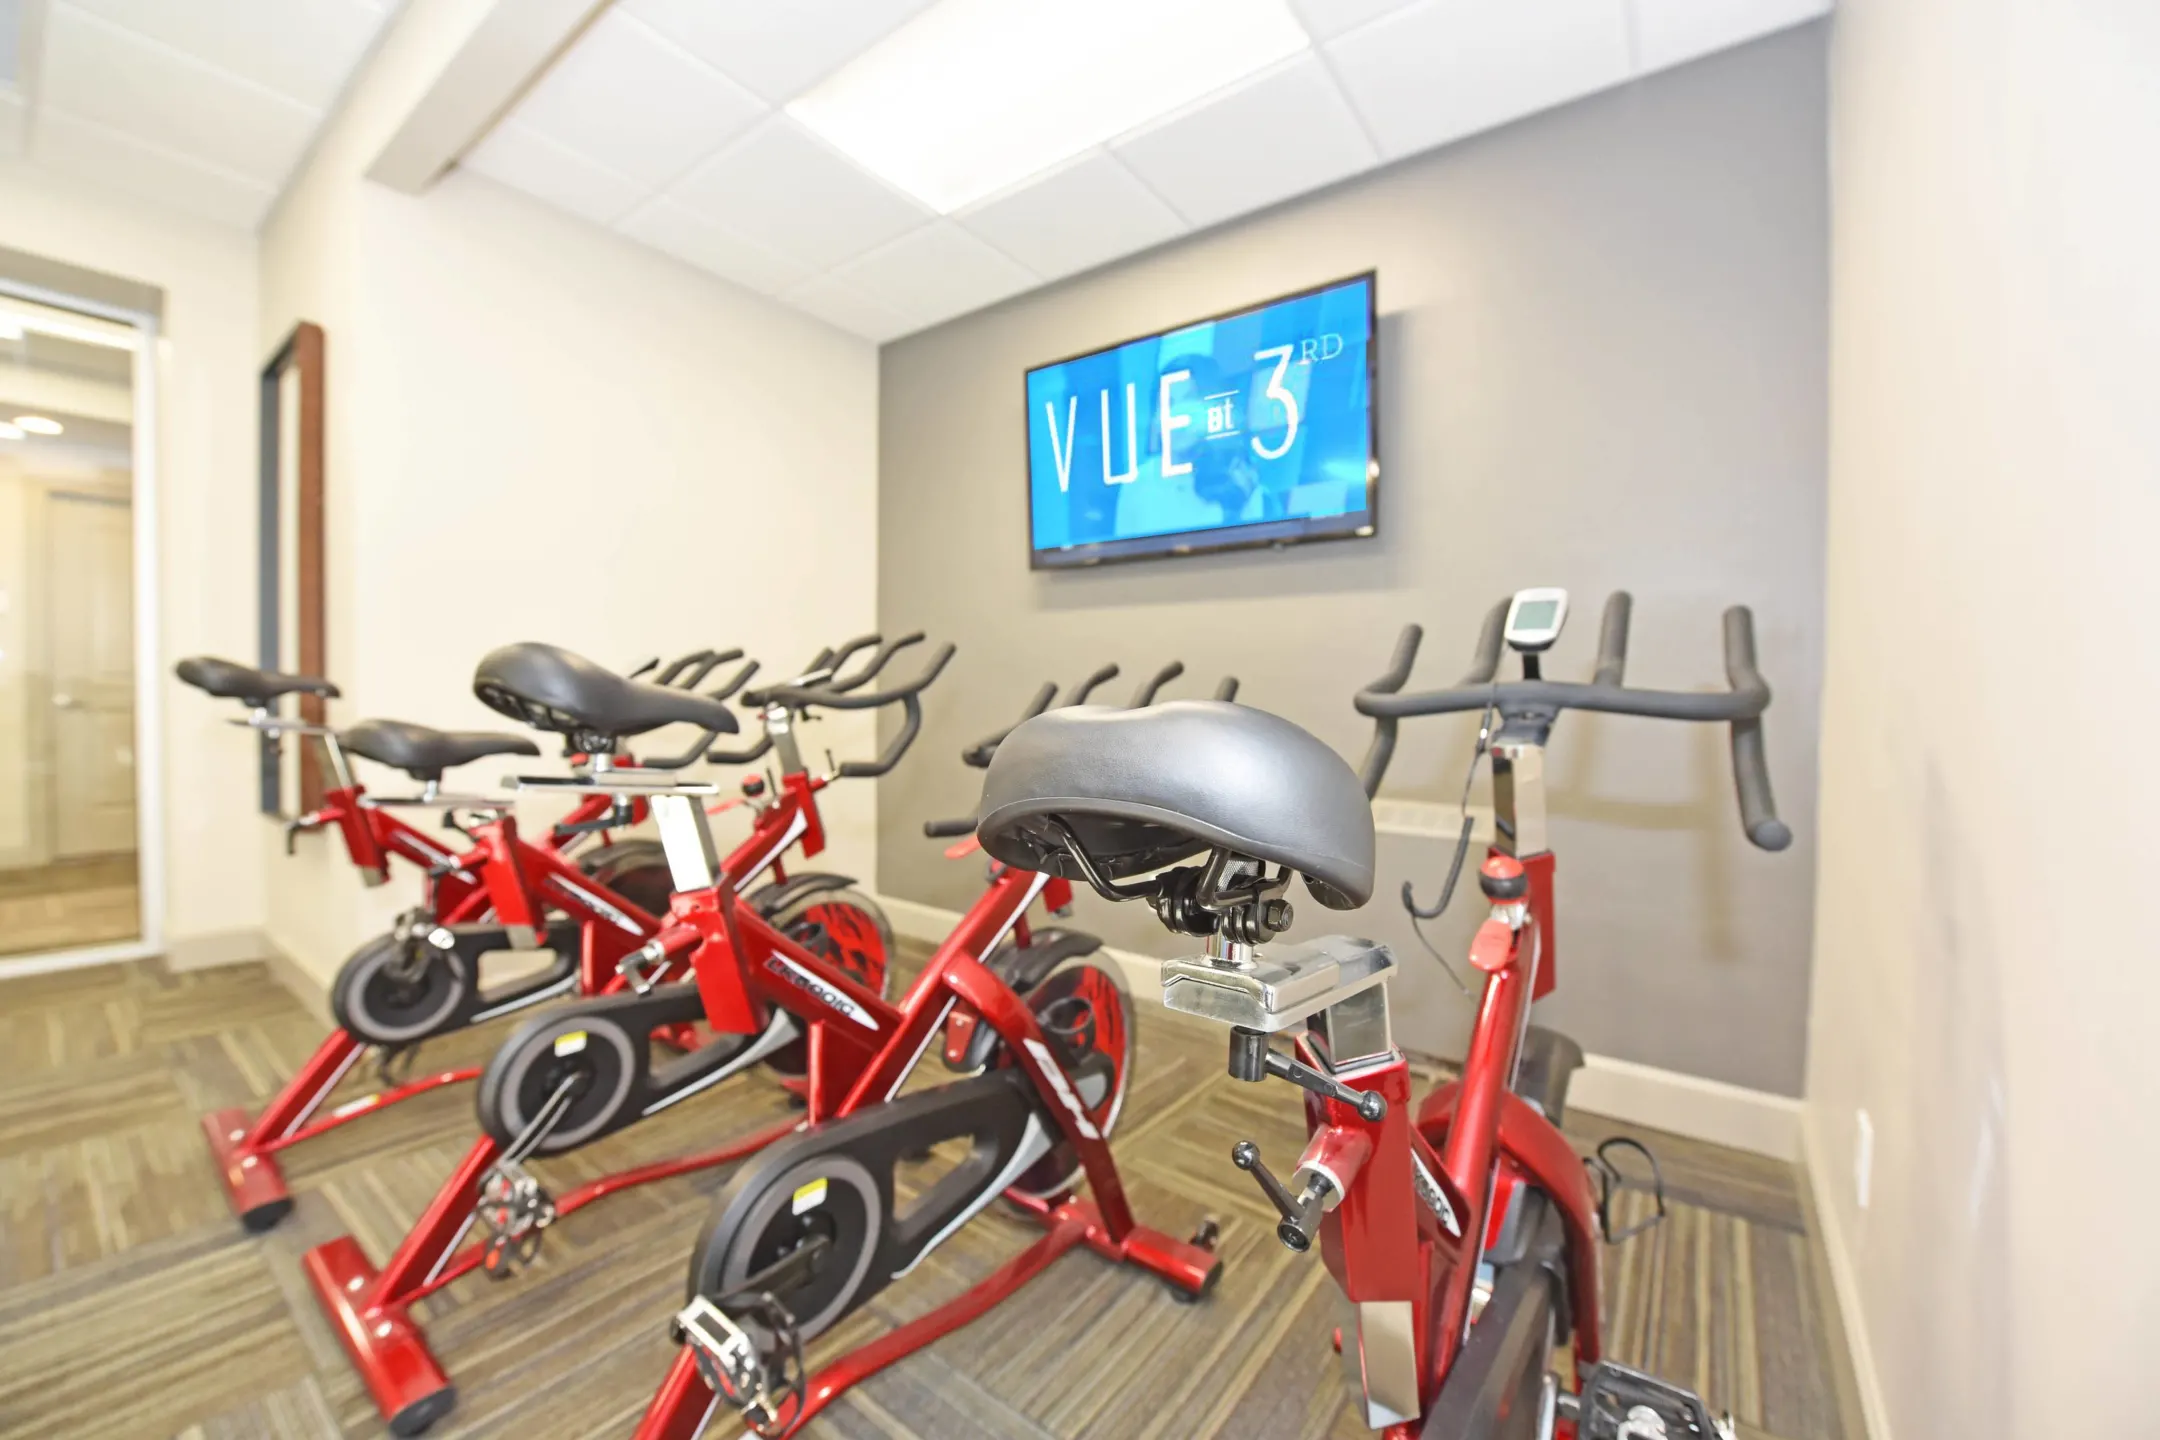 Fitness Weight Room - Vue at 3rd Street - Louisville, KY